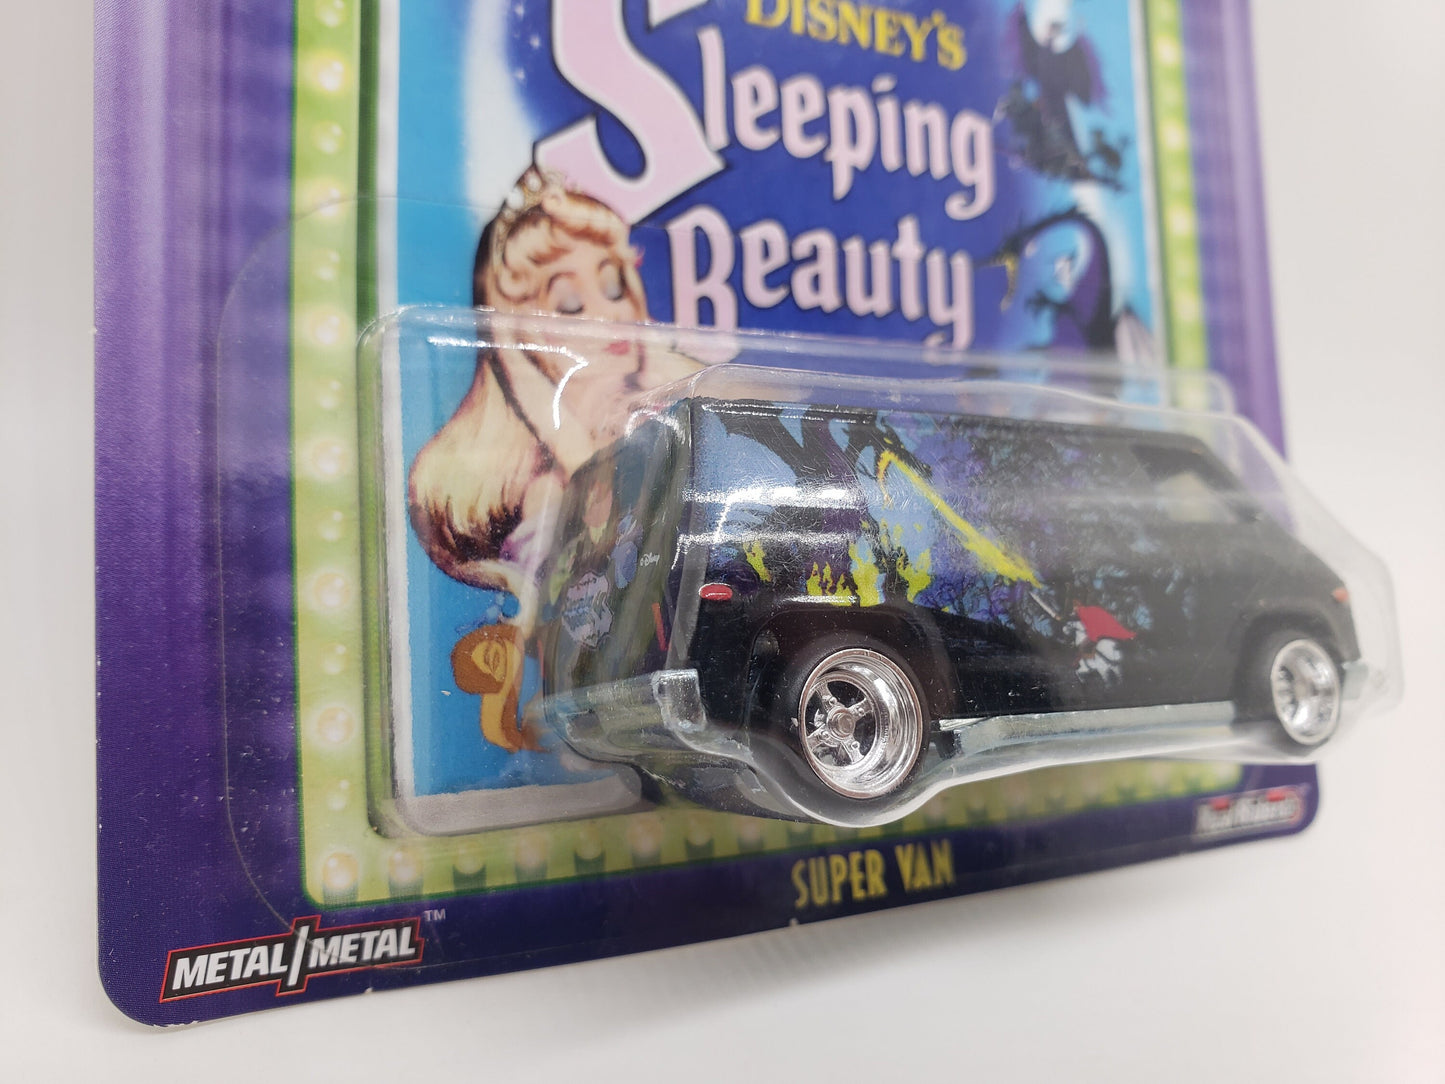 Hot Wheels Super Van Black Pop Culture Sleeping Beauty Perfect Birthday Gift Miniature Collectable Scale Model Toy Car